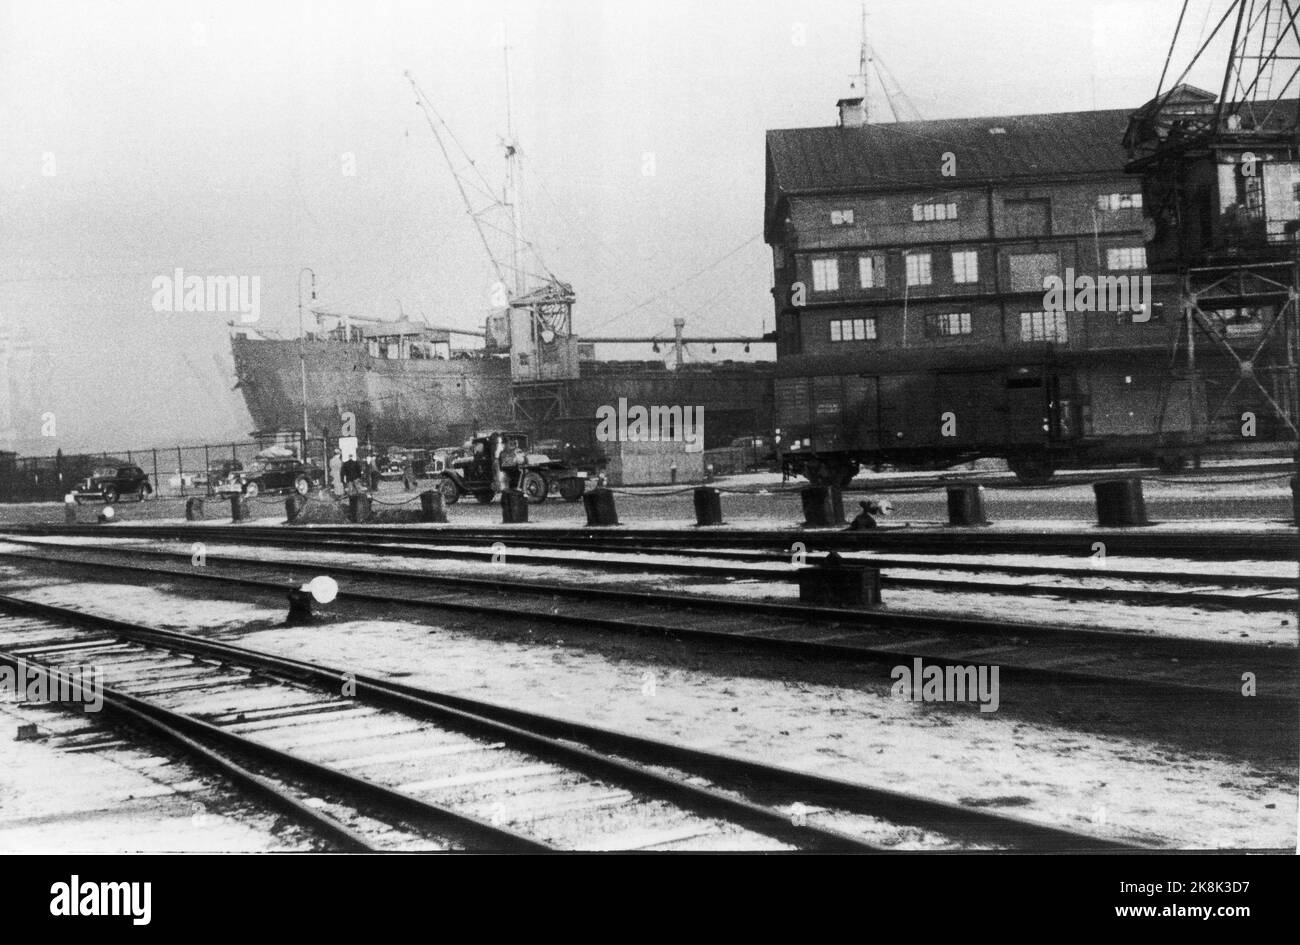 Oslo 19421126. The German ship Danube took 530 Norwegian Jews to the extermination camps. In the picture you see the boat and the American line's old buildings. The Jews were driven to the Port of Oslo with taxis, railway wagons and trucks (see picture) The men came in railway wagons (caravan) from Berg prison camp outside Tønsberg, where they had been approx. one month. Women and children were driven in taxis. 767 were deported. Only 30 survived. Compared to other countries, such as Denmark, few Jews were rescued ...... Photo: Georg W. Fossum / NTB  NB: OK for sale. Billed on Fossum Stock Photo